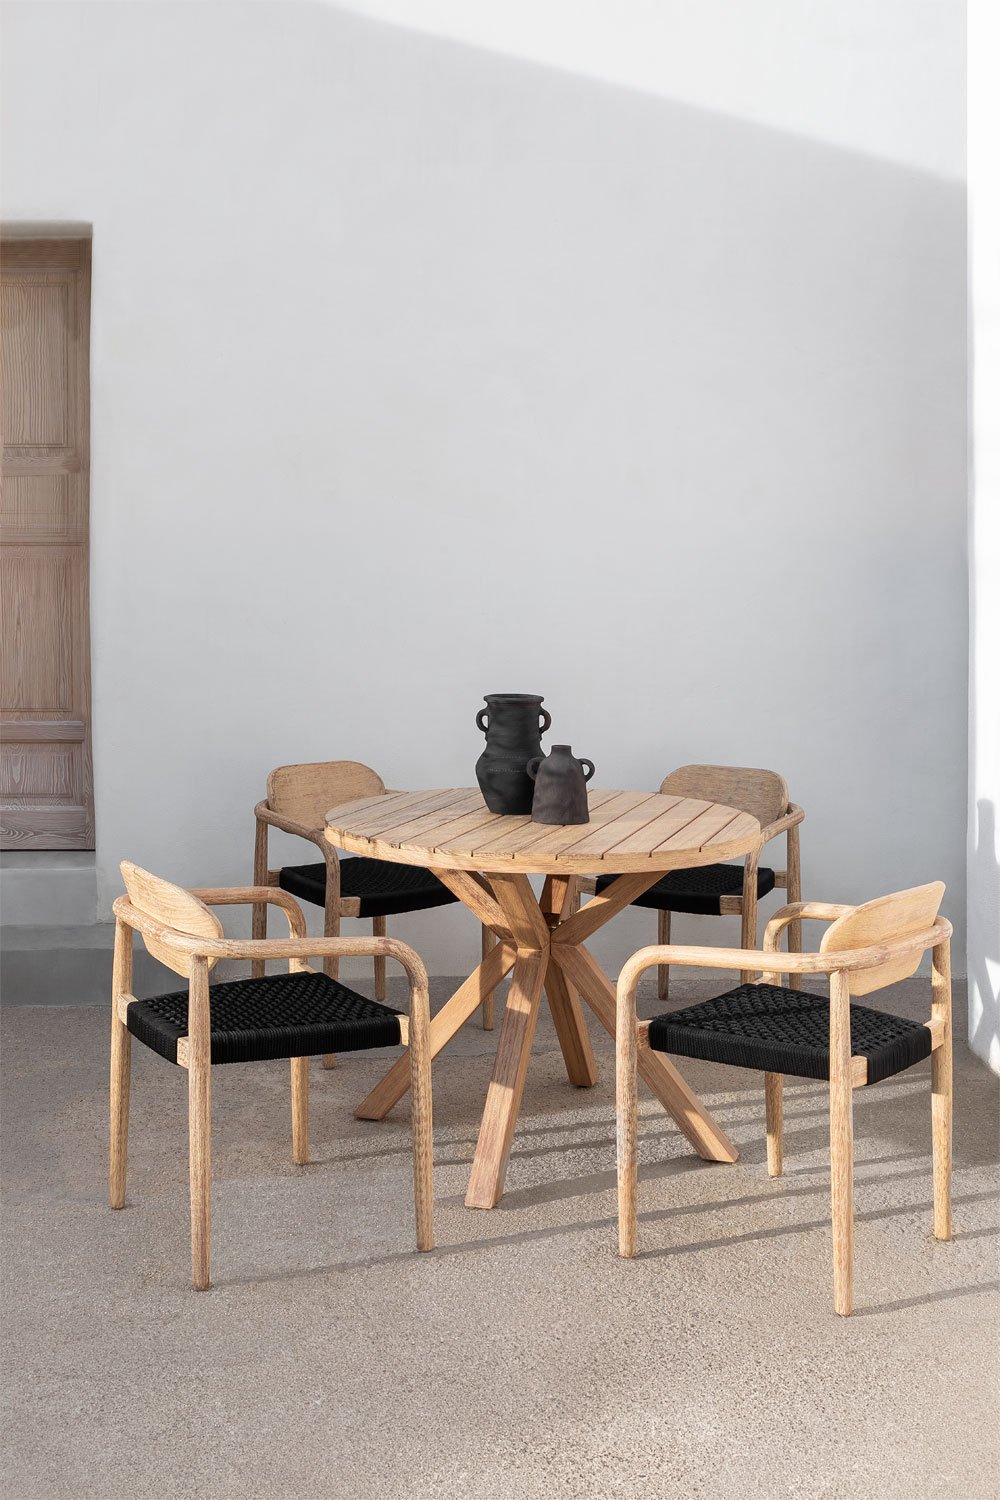 Set of Round Table (Ø100 cm) & 4 Wooden Garden Chairs with Armrests Naele , gallery image 1